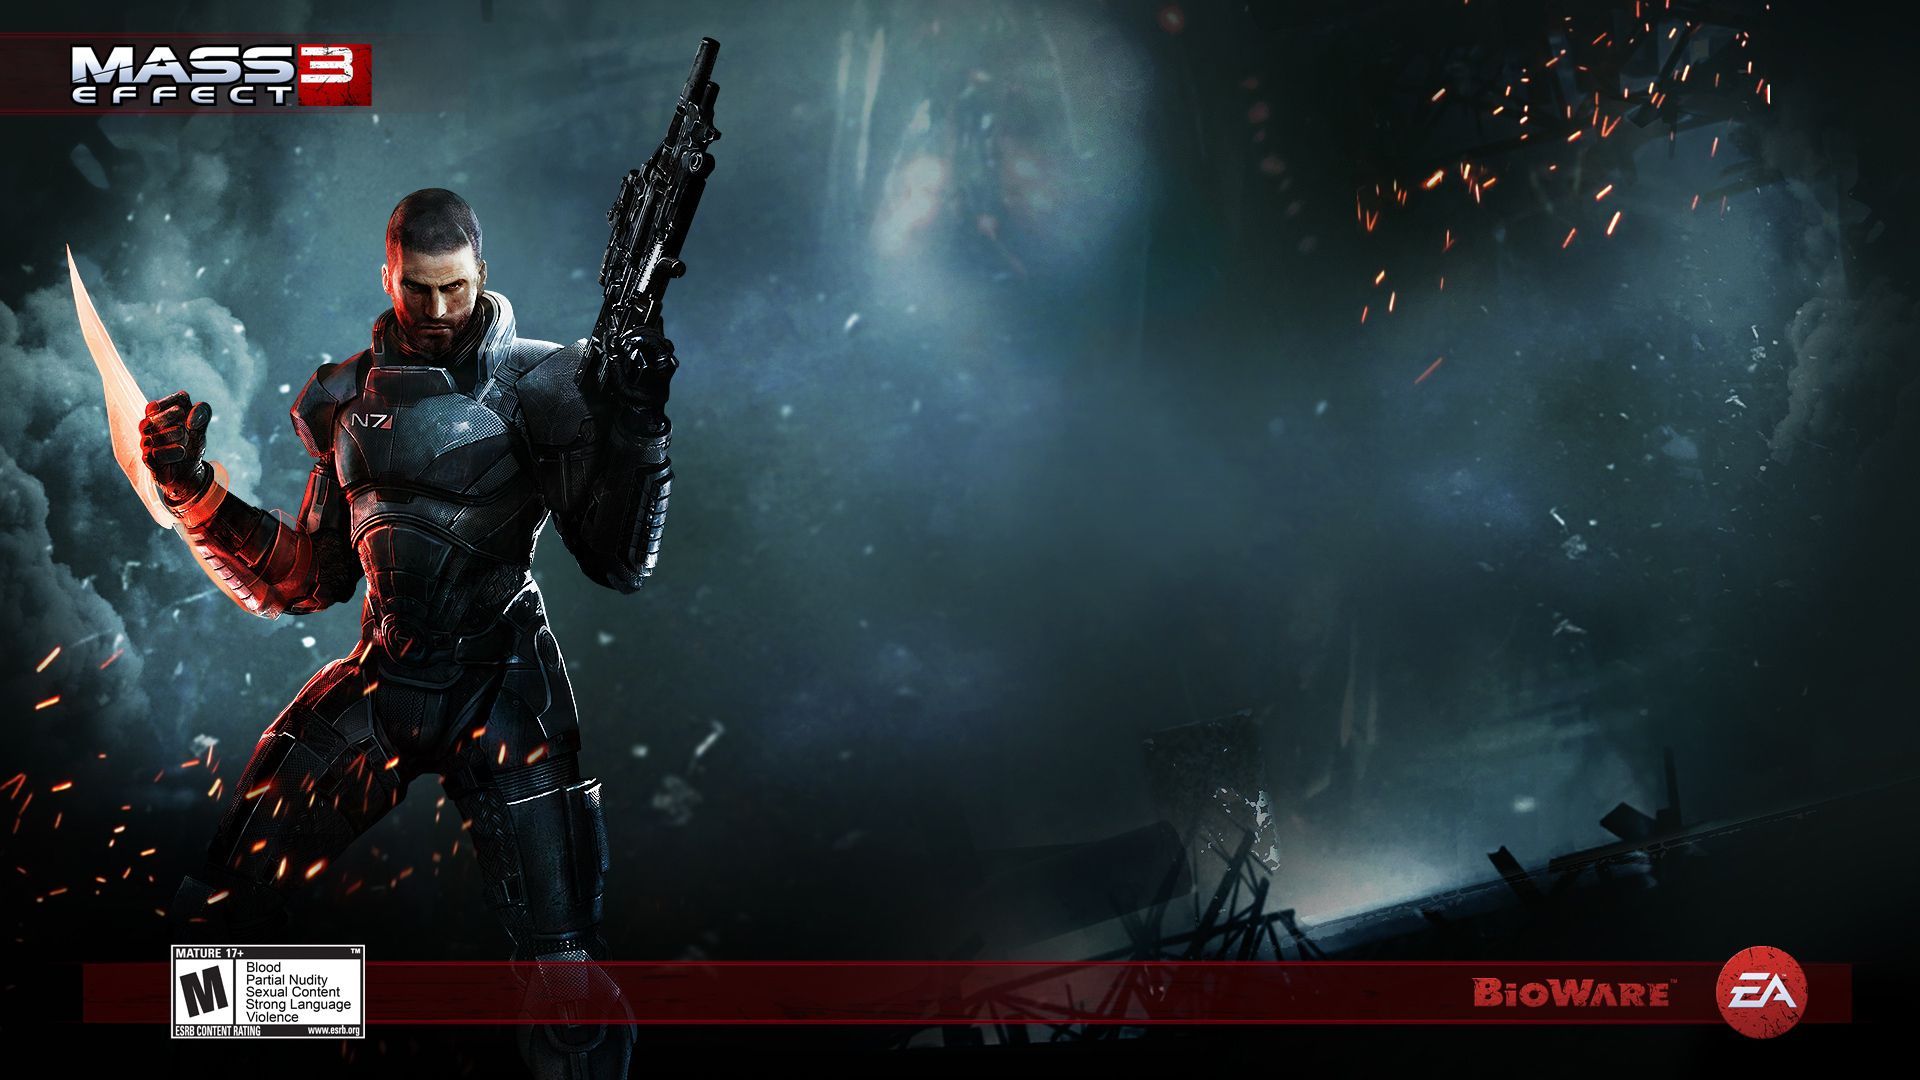 Action Game Mass Effect 3 Wallpapers | HD Wallpapers